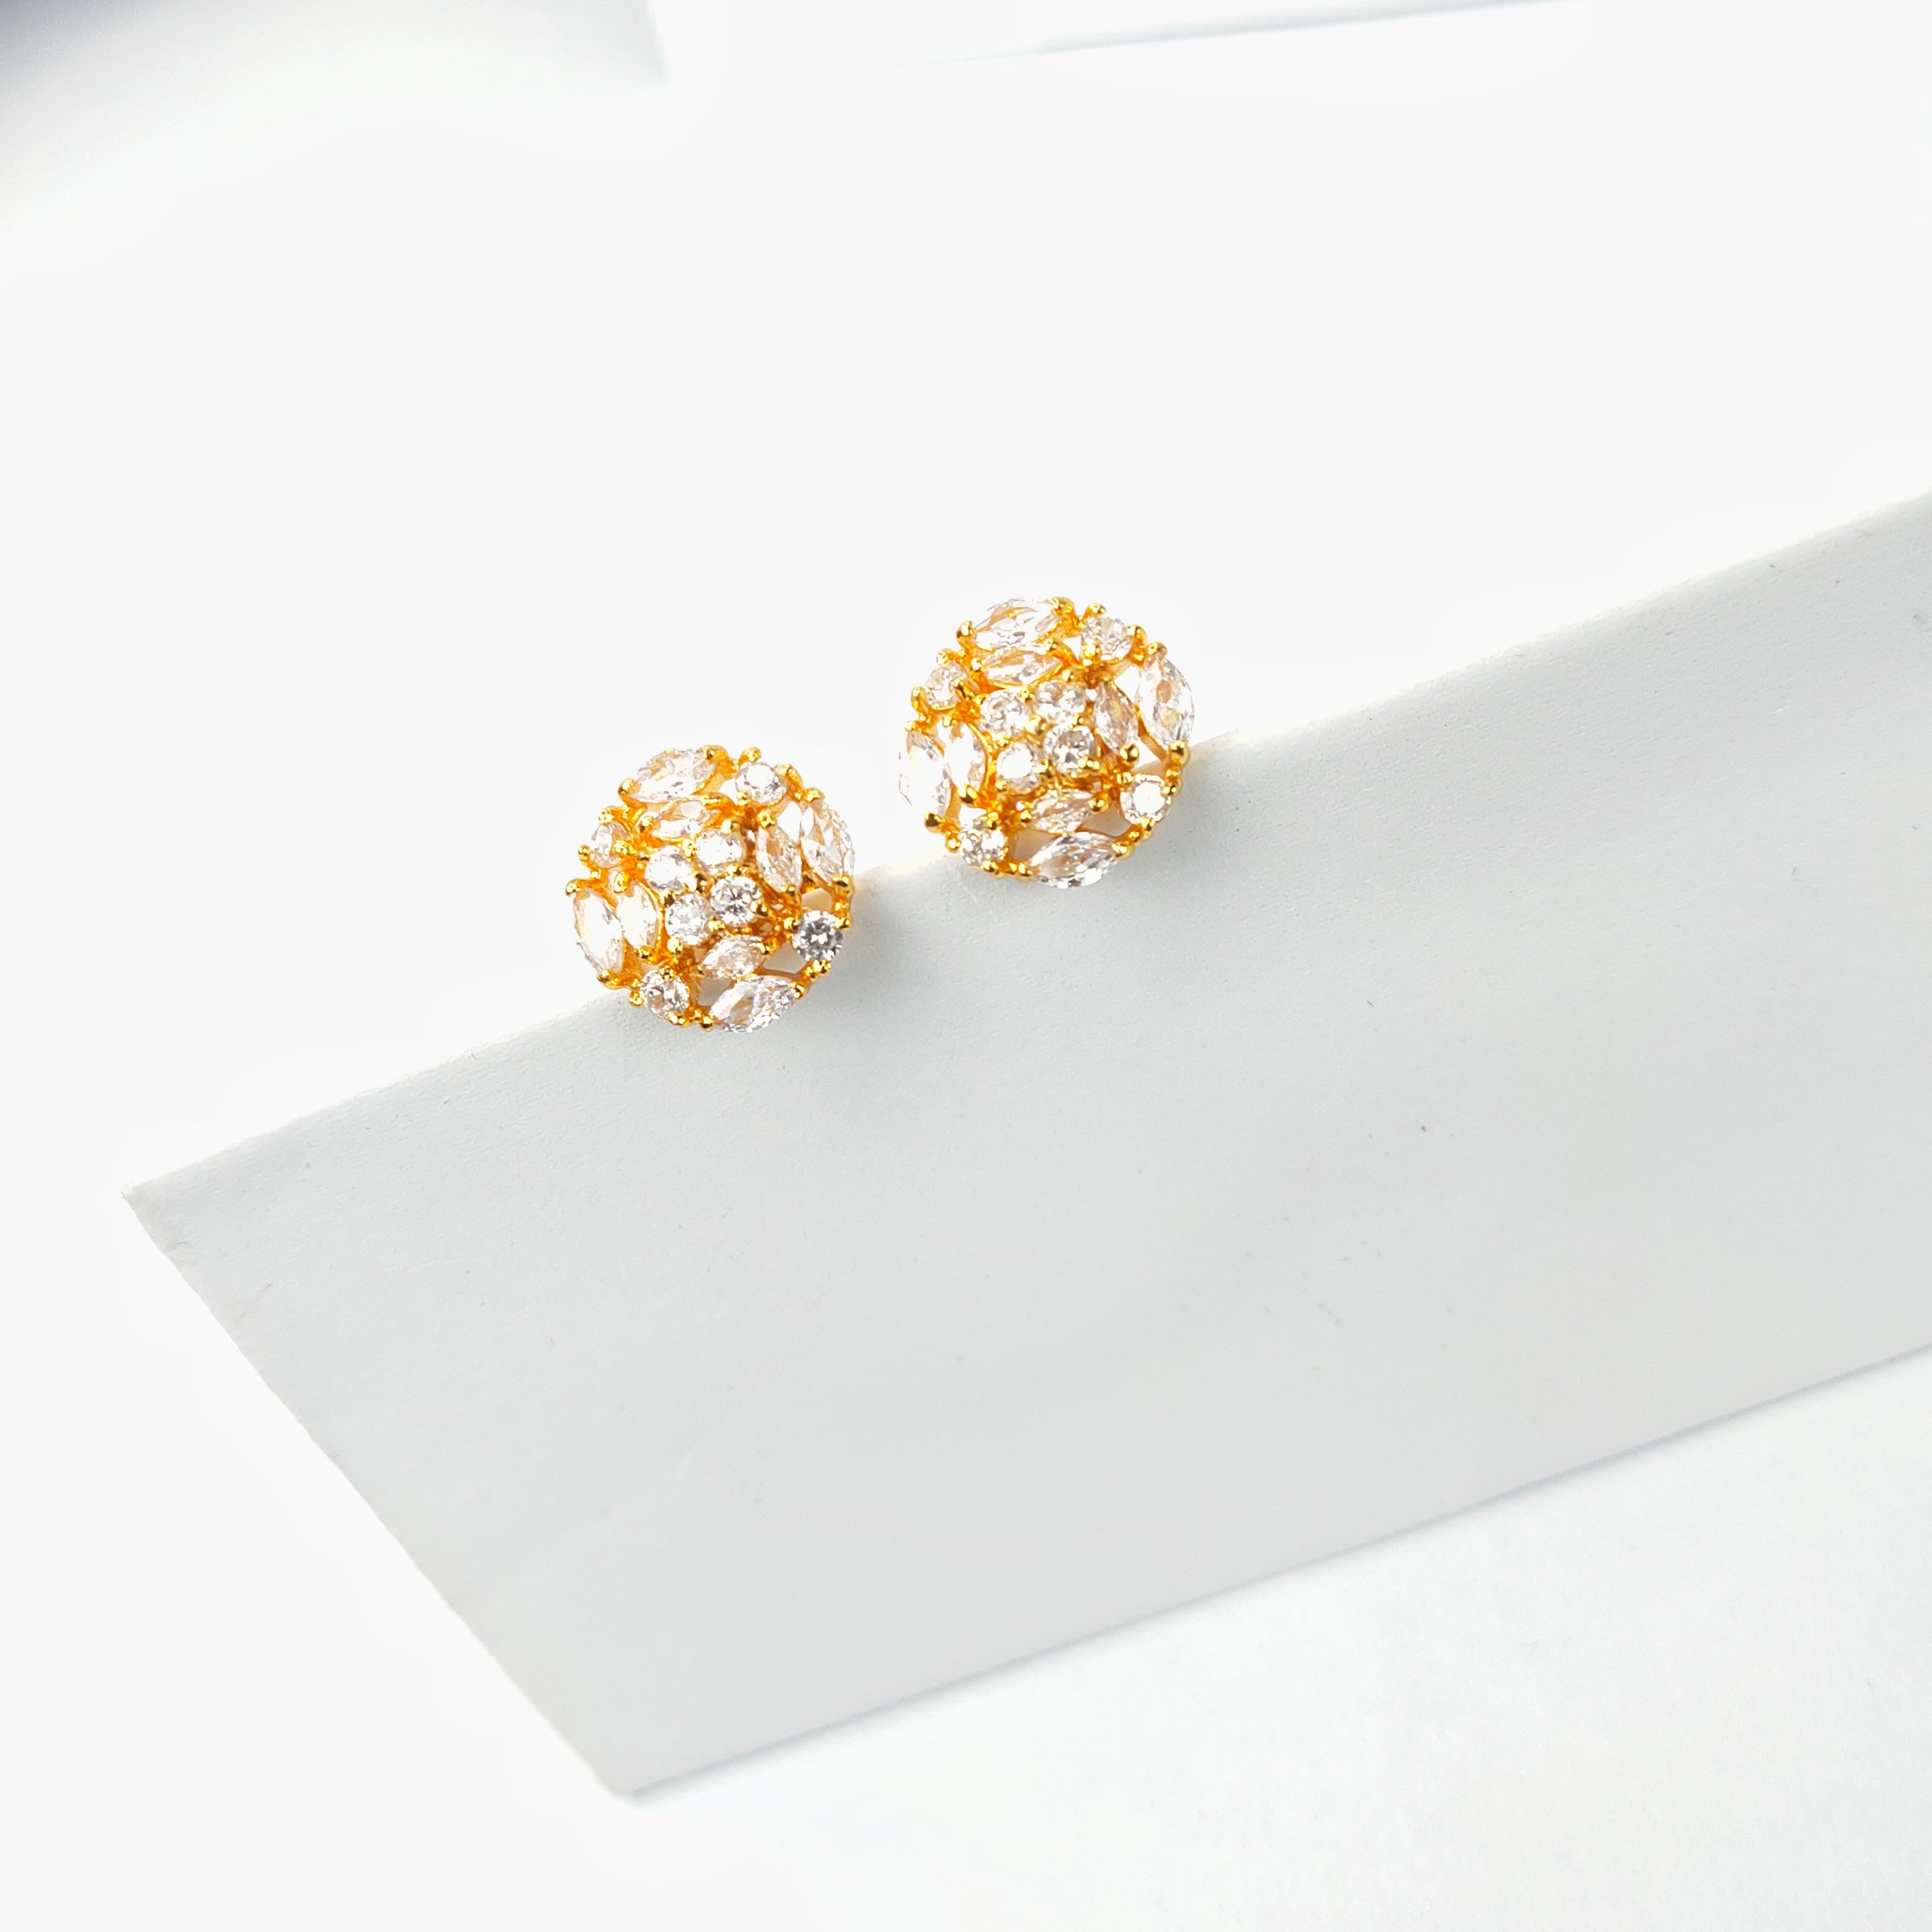 Top more than 134 new gold small earring design